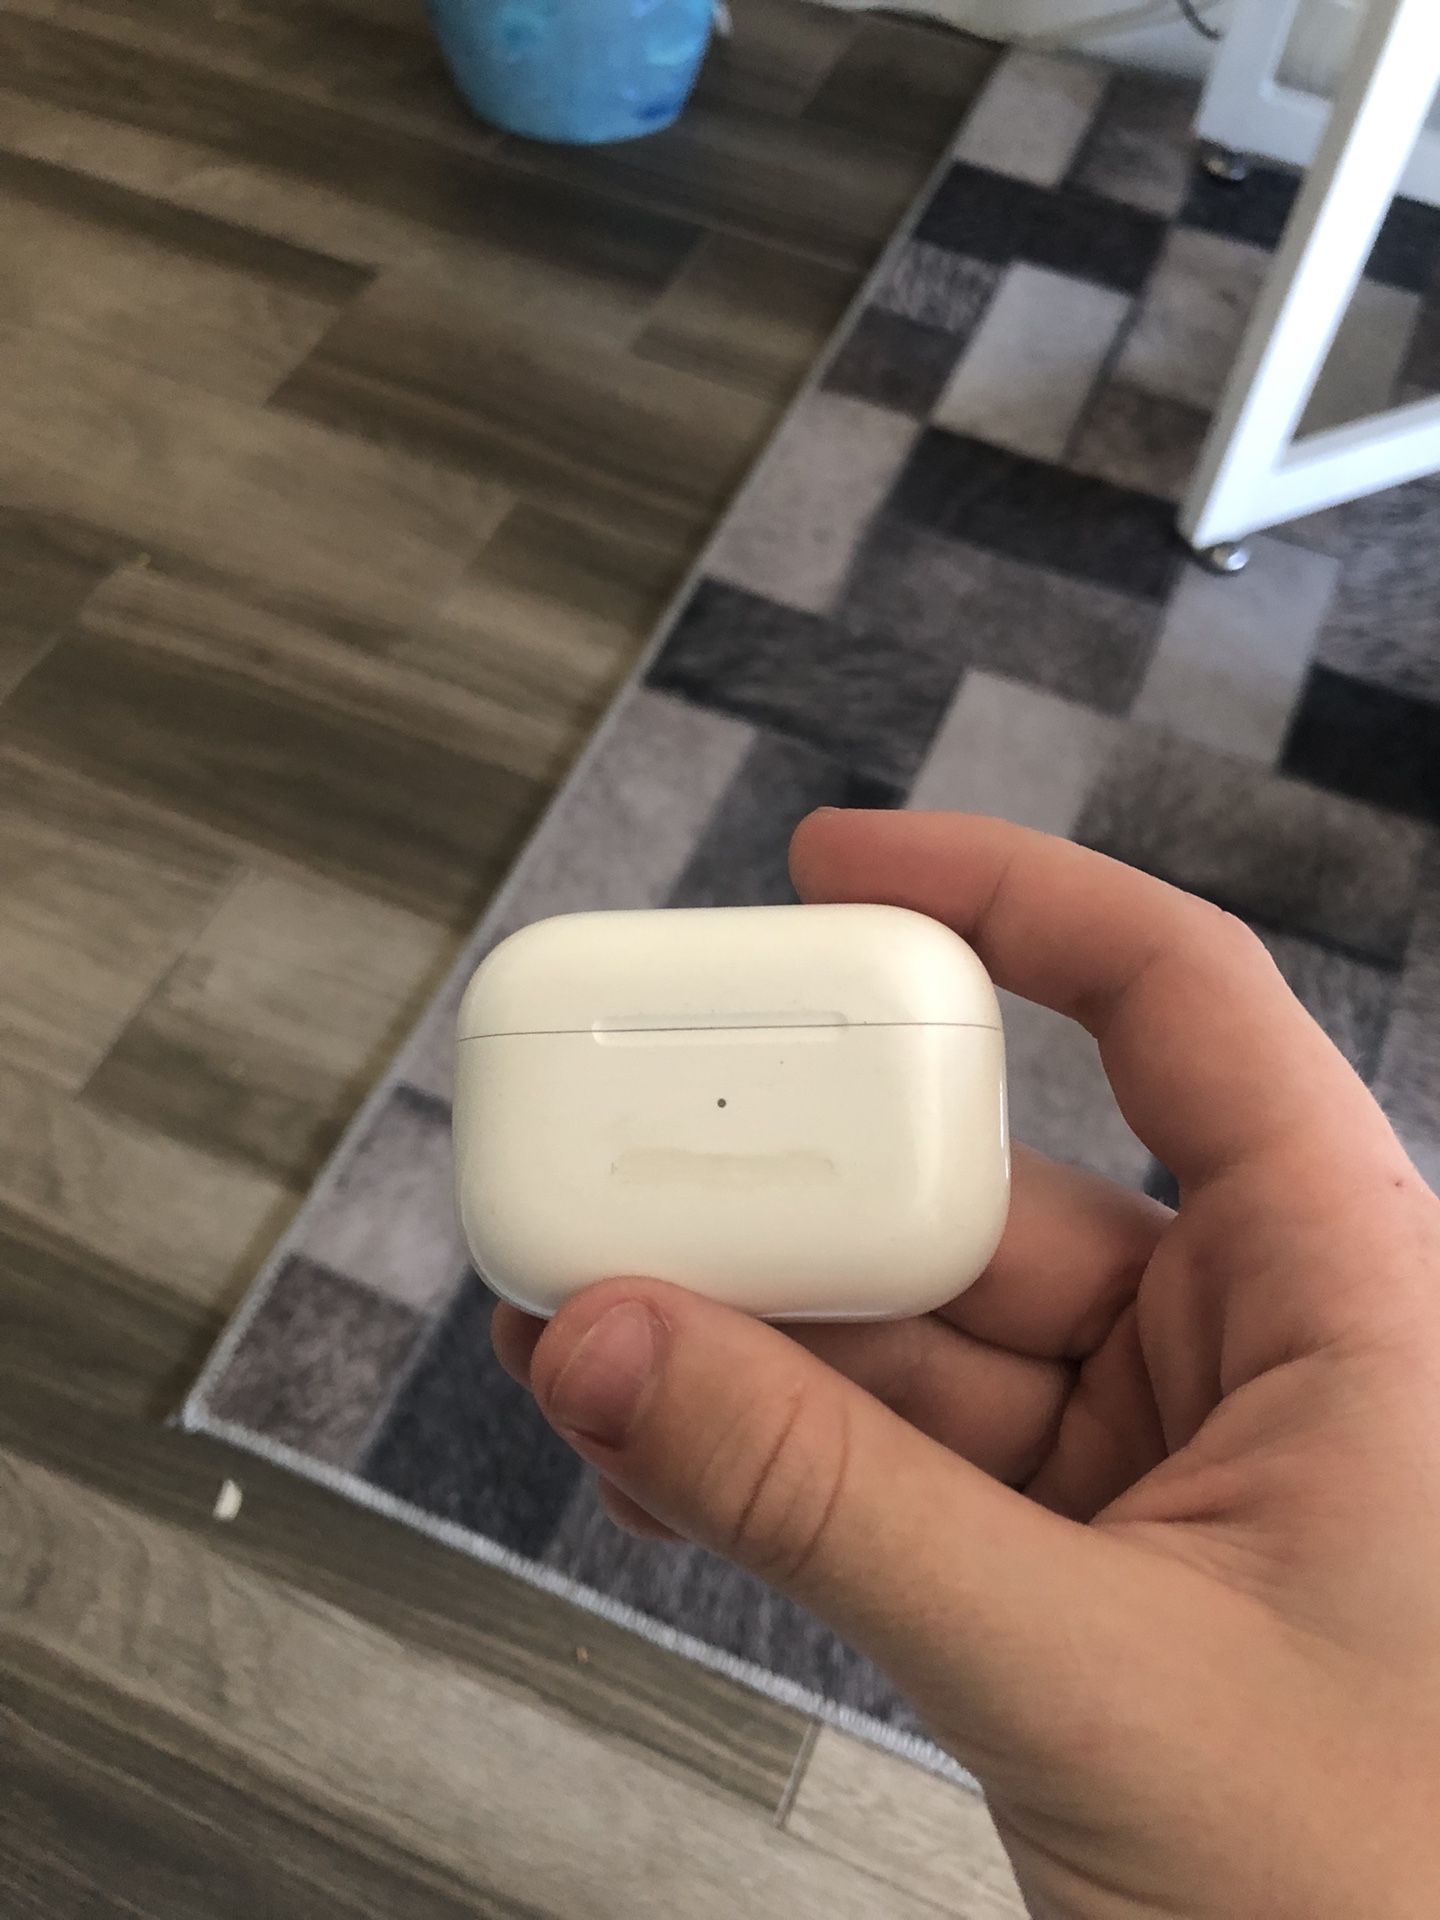 Airpods pro (missing left airpod)